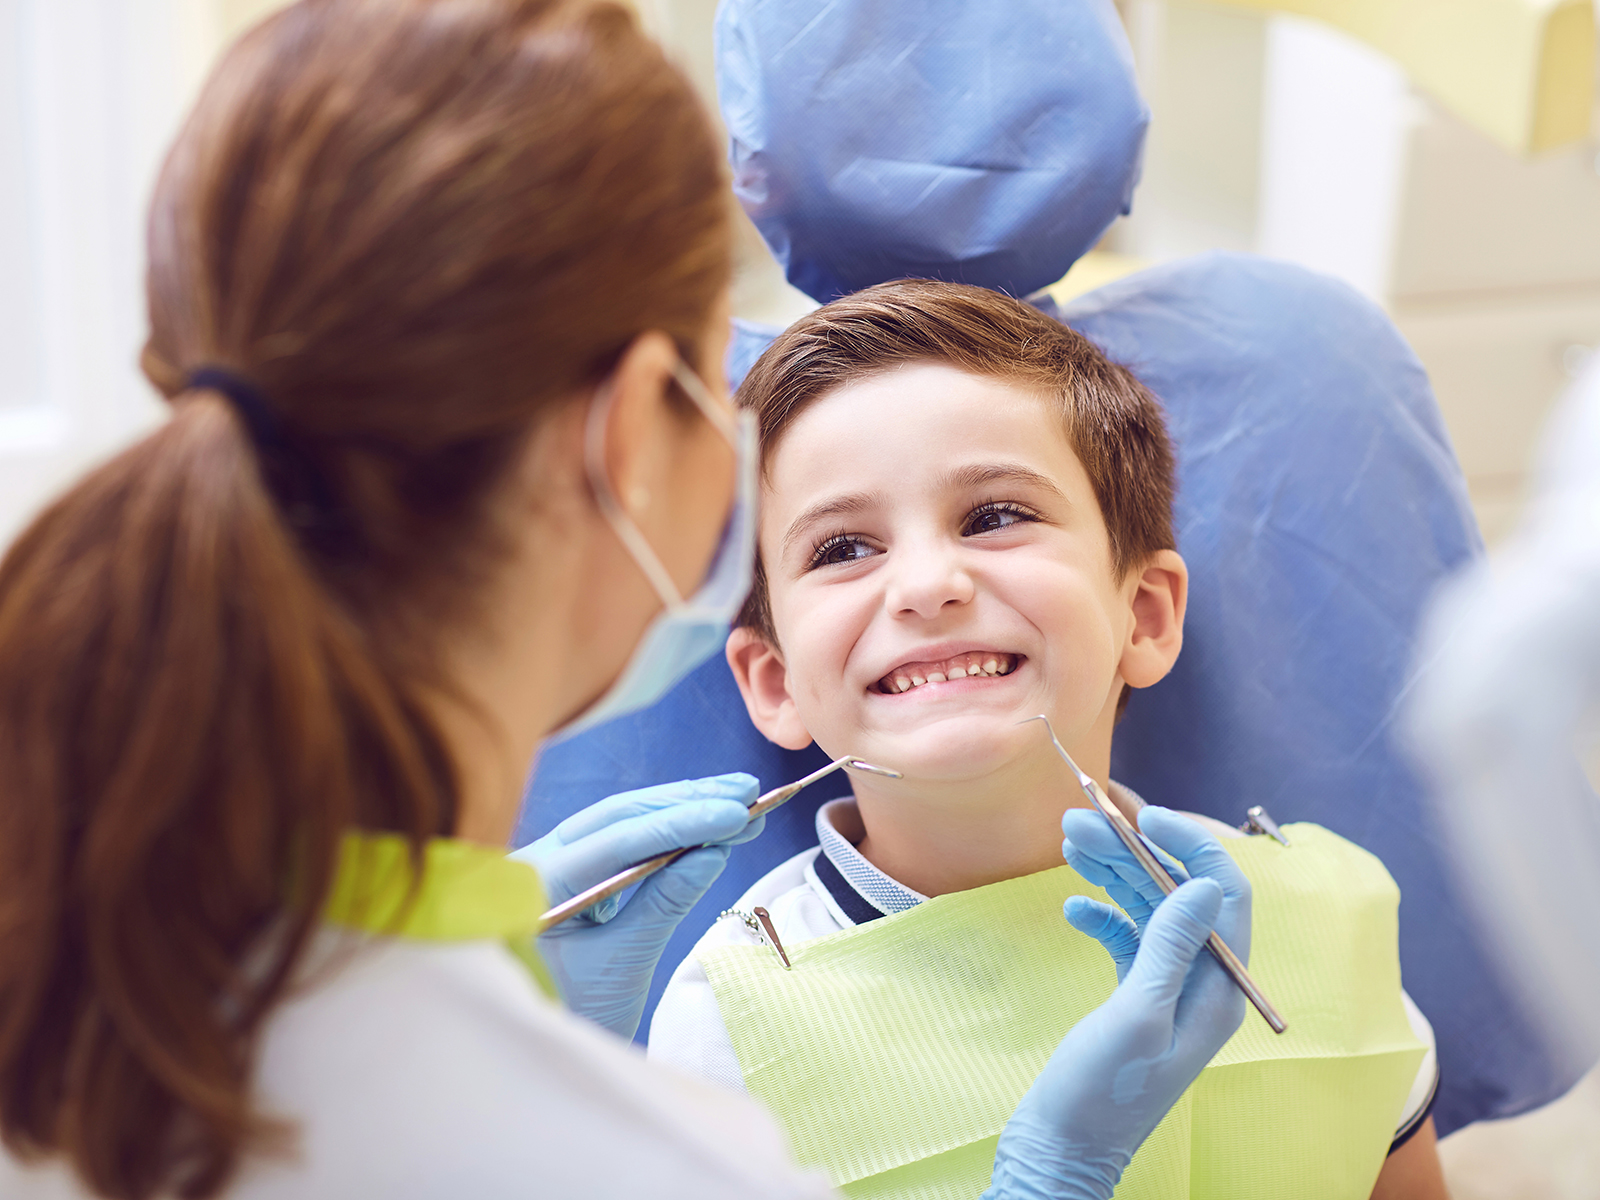 Does Your Child Need Endodontic Treatment?